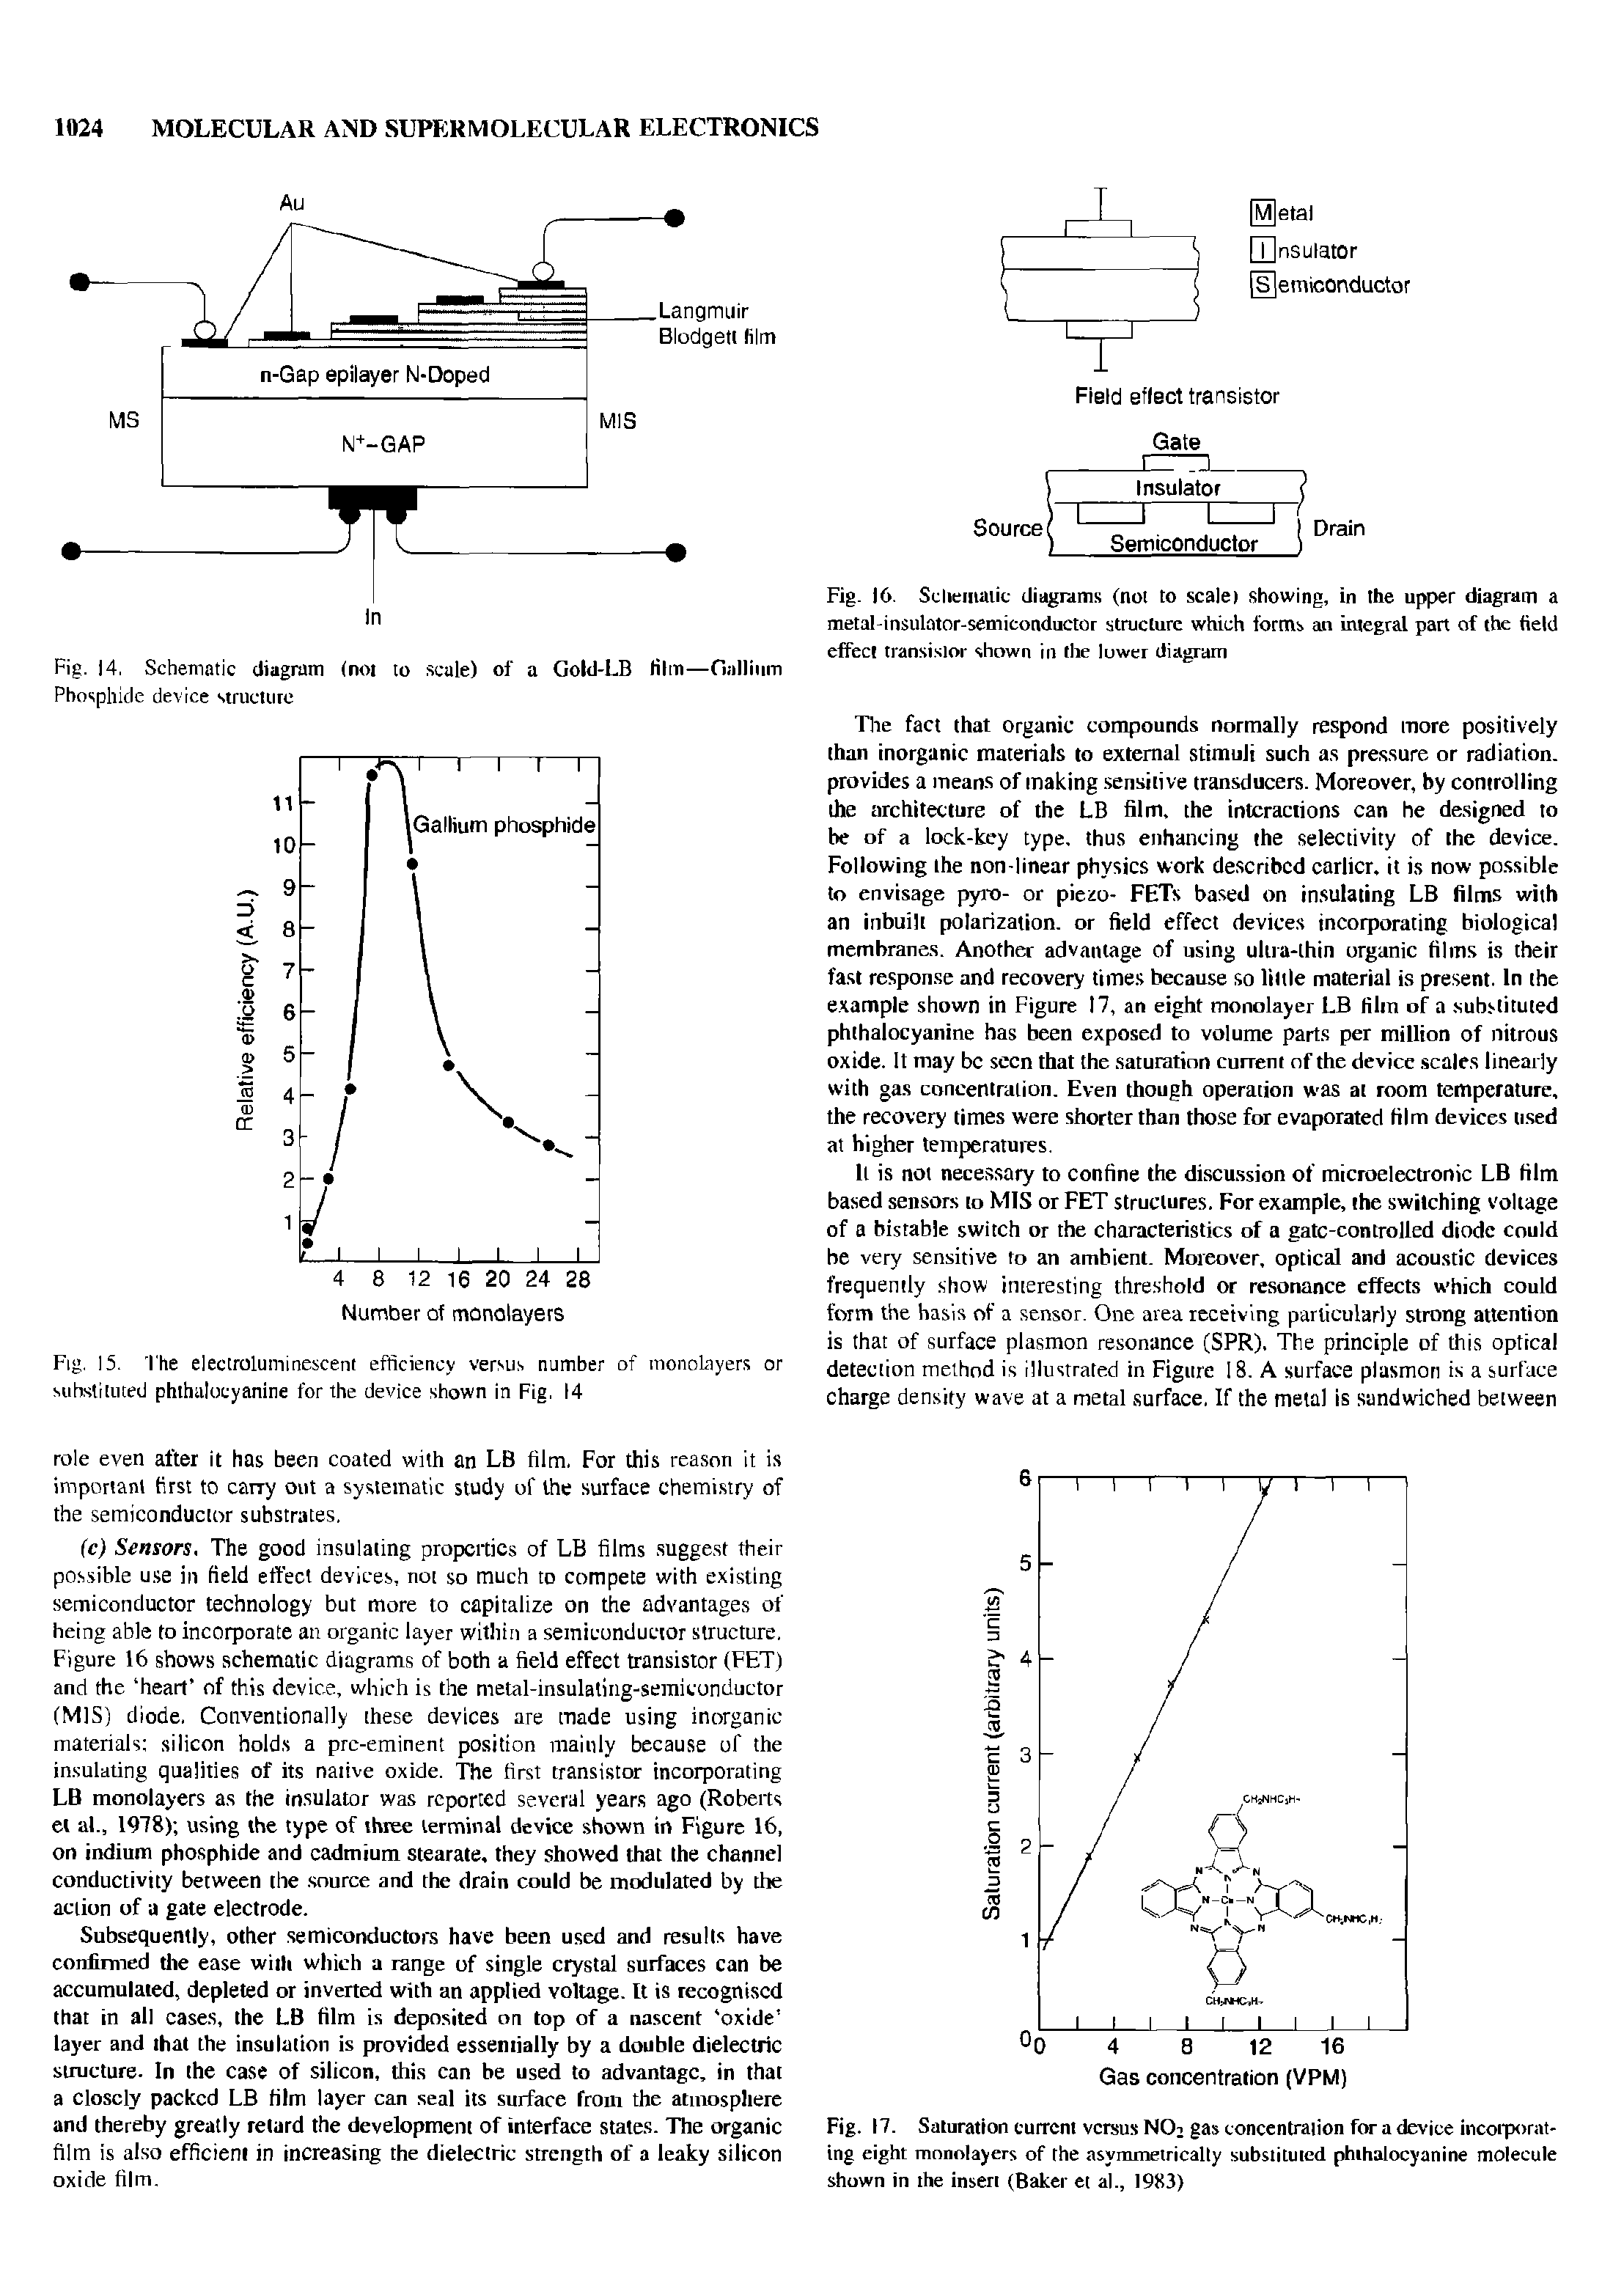 Fig. 17. Saturation current versus NCT gas concentration for a device incorporating eight monolayers of the asymmetrically substituted phthalocyanine molecule shown in the inseri (Baker et al., 1983)...